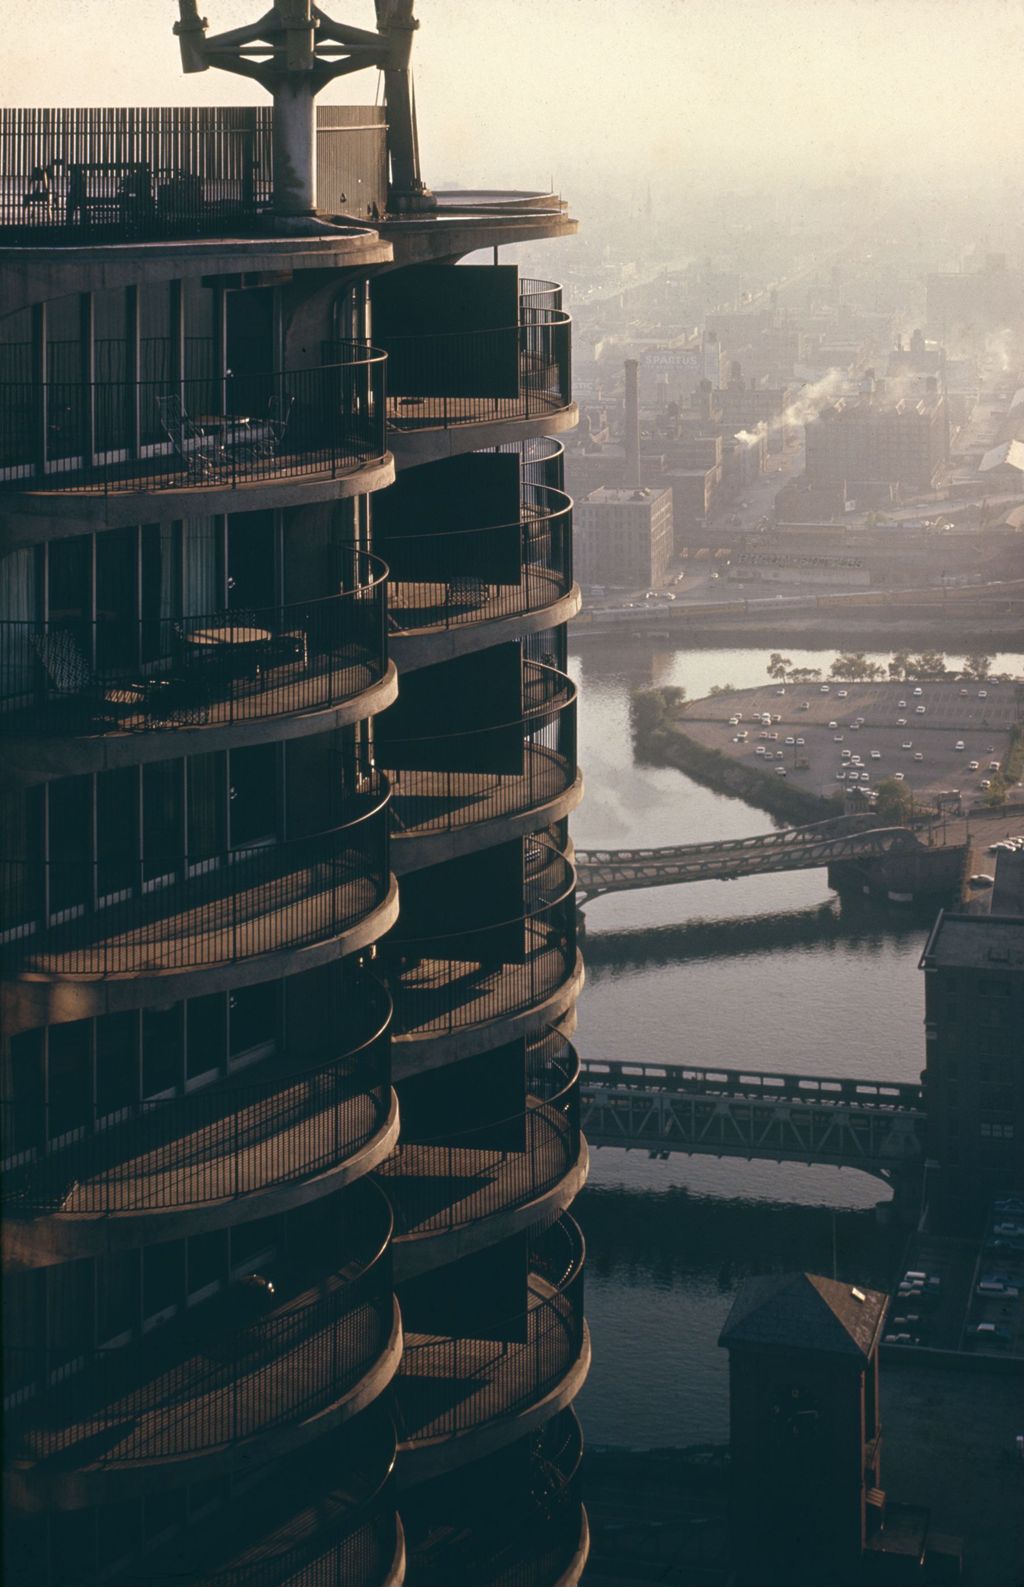 Miniature of Marina City and Chicago River